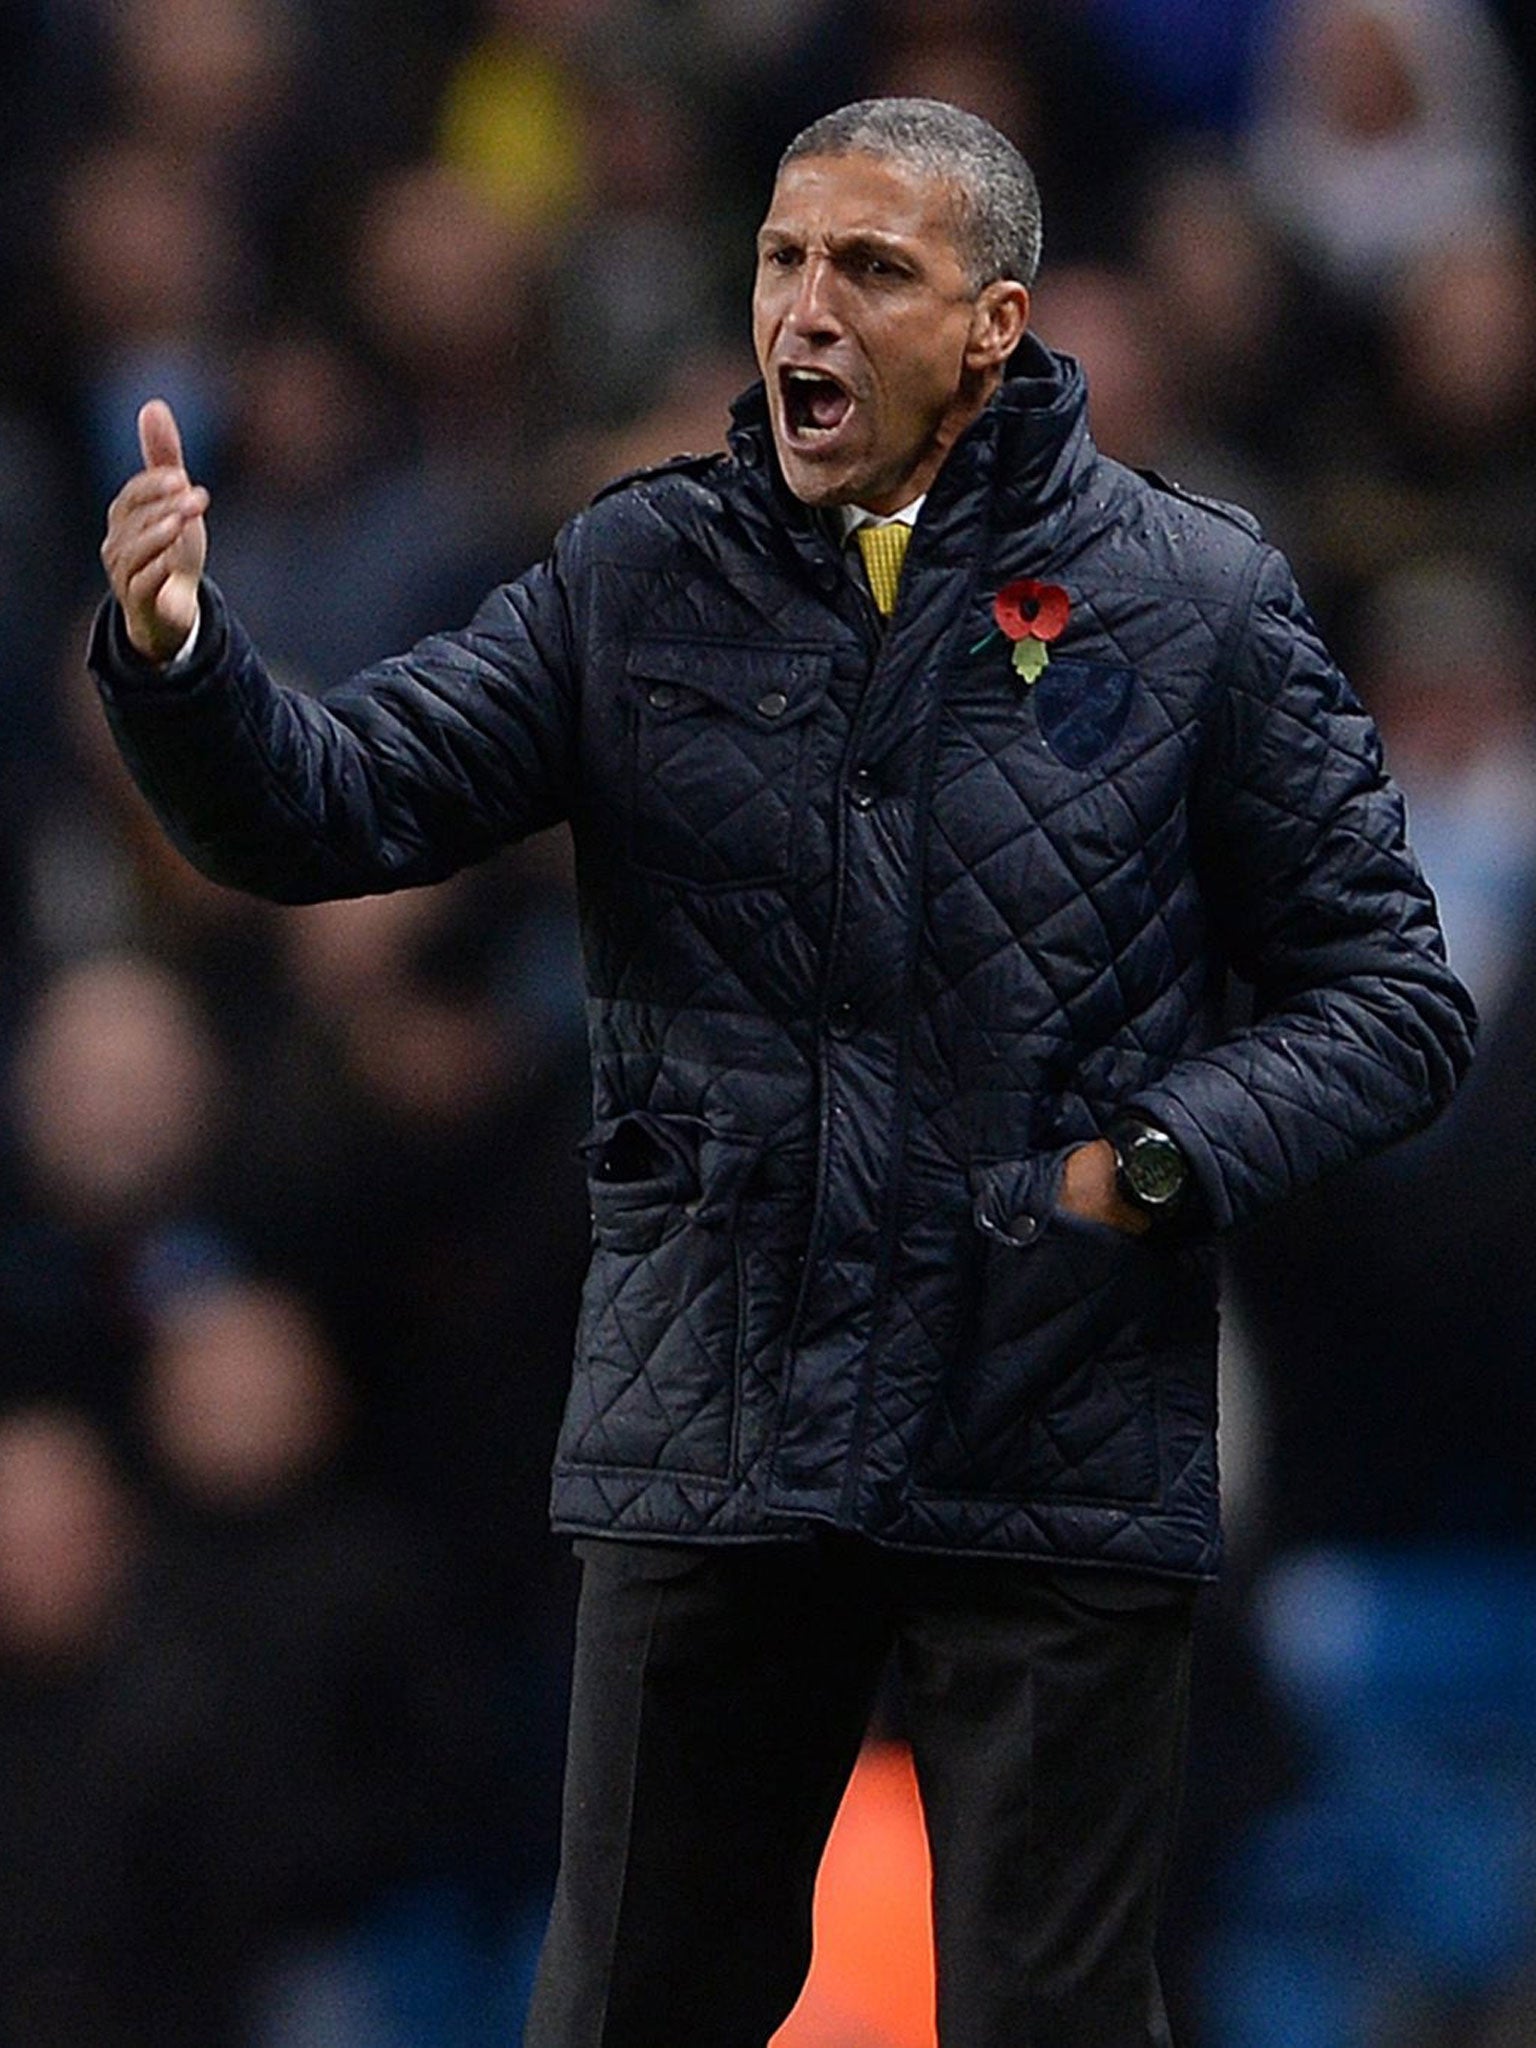 Norwich City's Chris Hughton is the Premier League's only black manager, while there are only two in the Football League